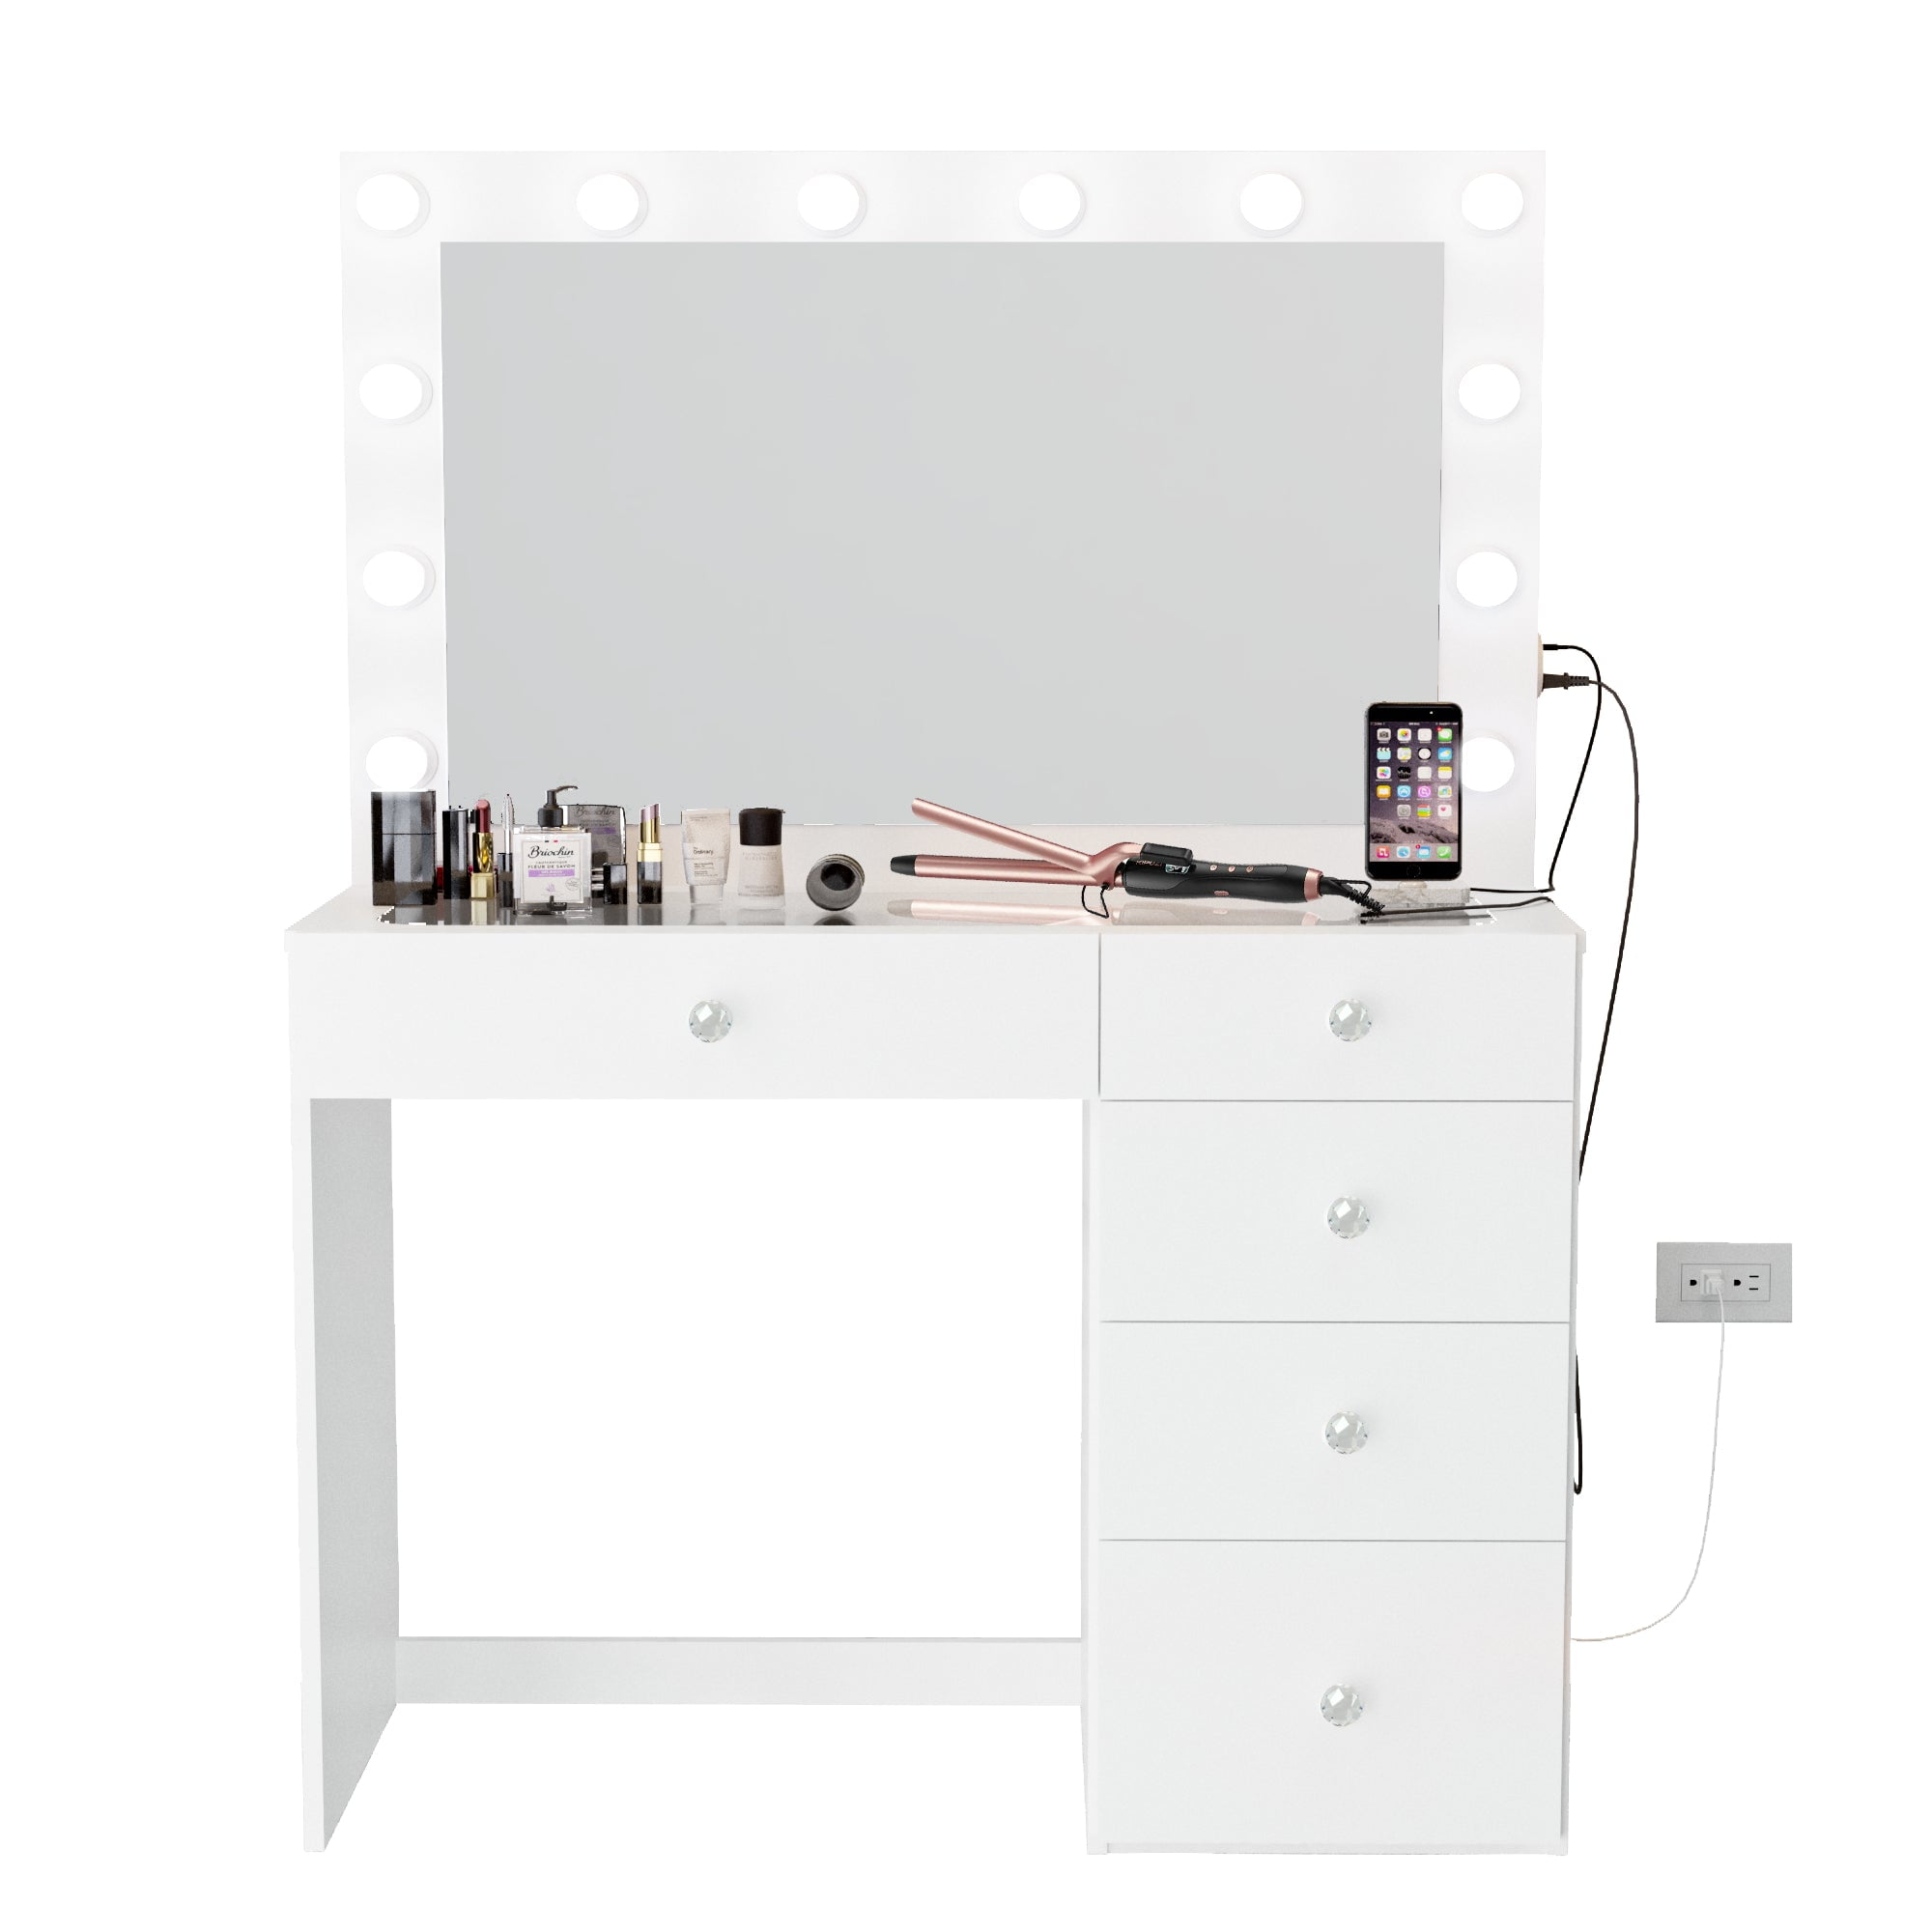 Drawers, White Boahaus Lights, Mirror Crystal with Alana 5 Ball Vanity Desk Knobs, Black and